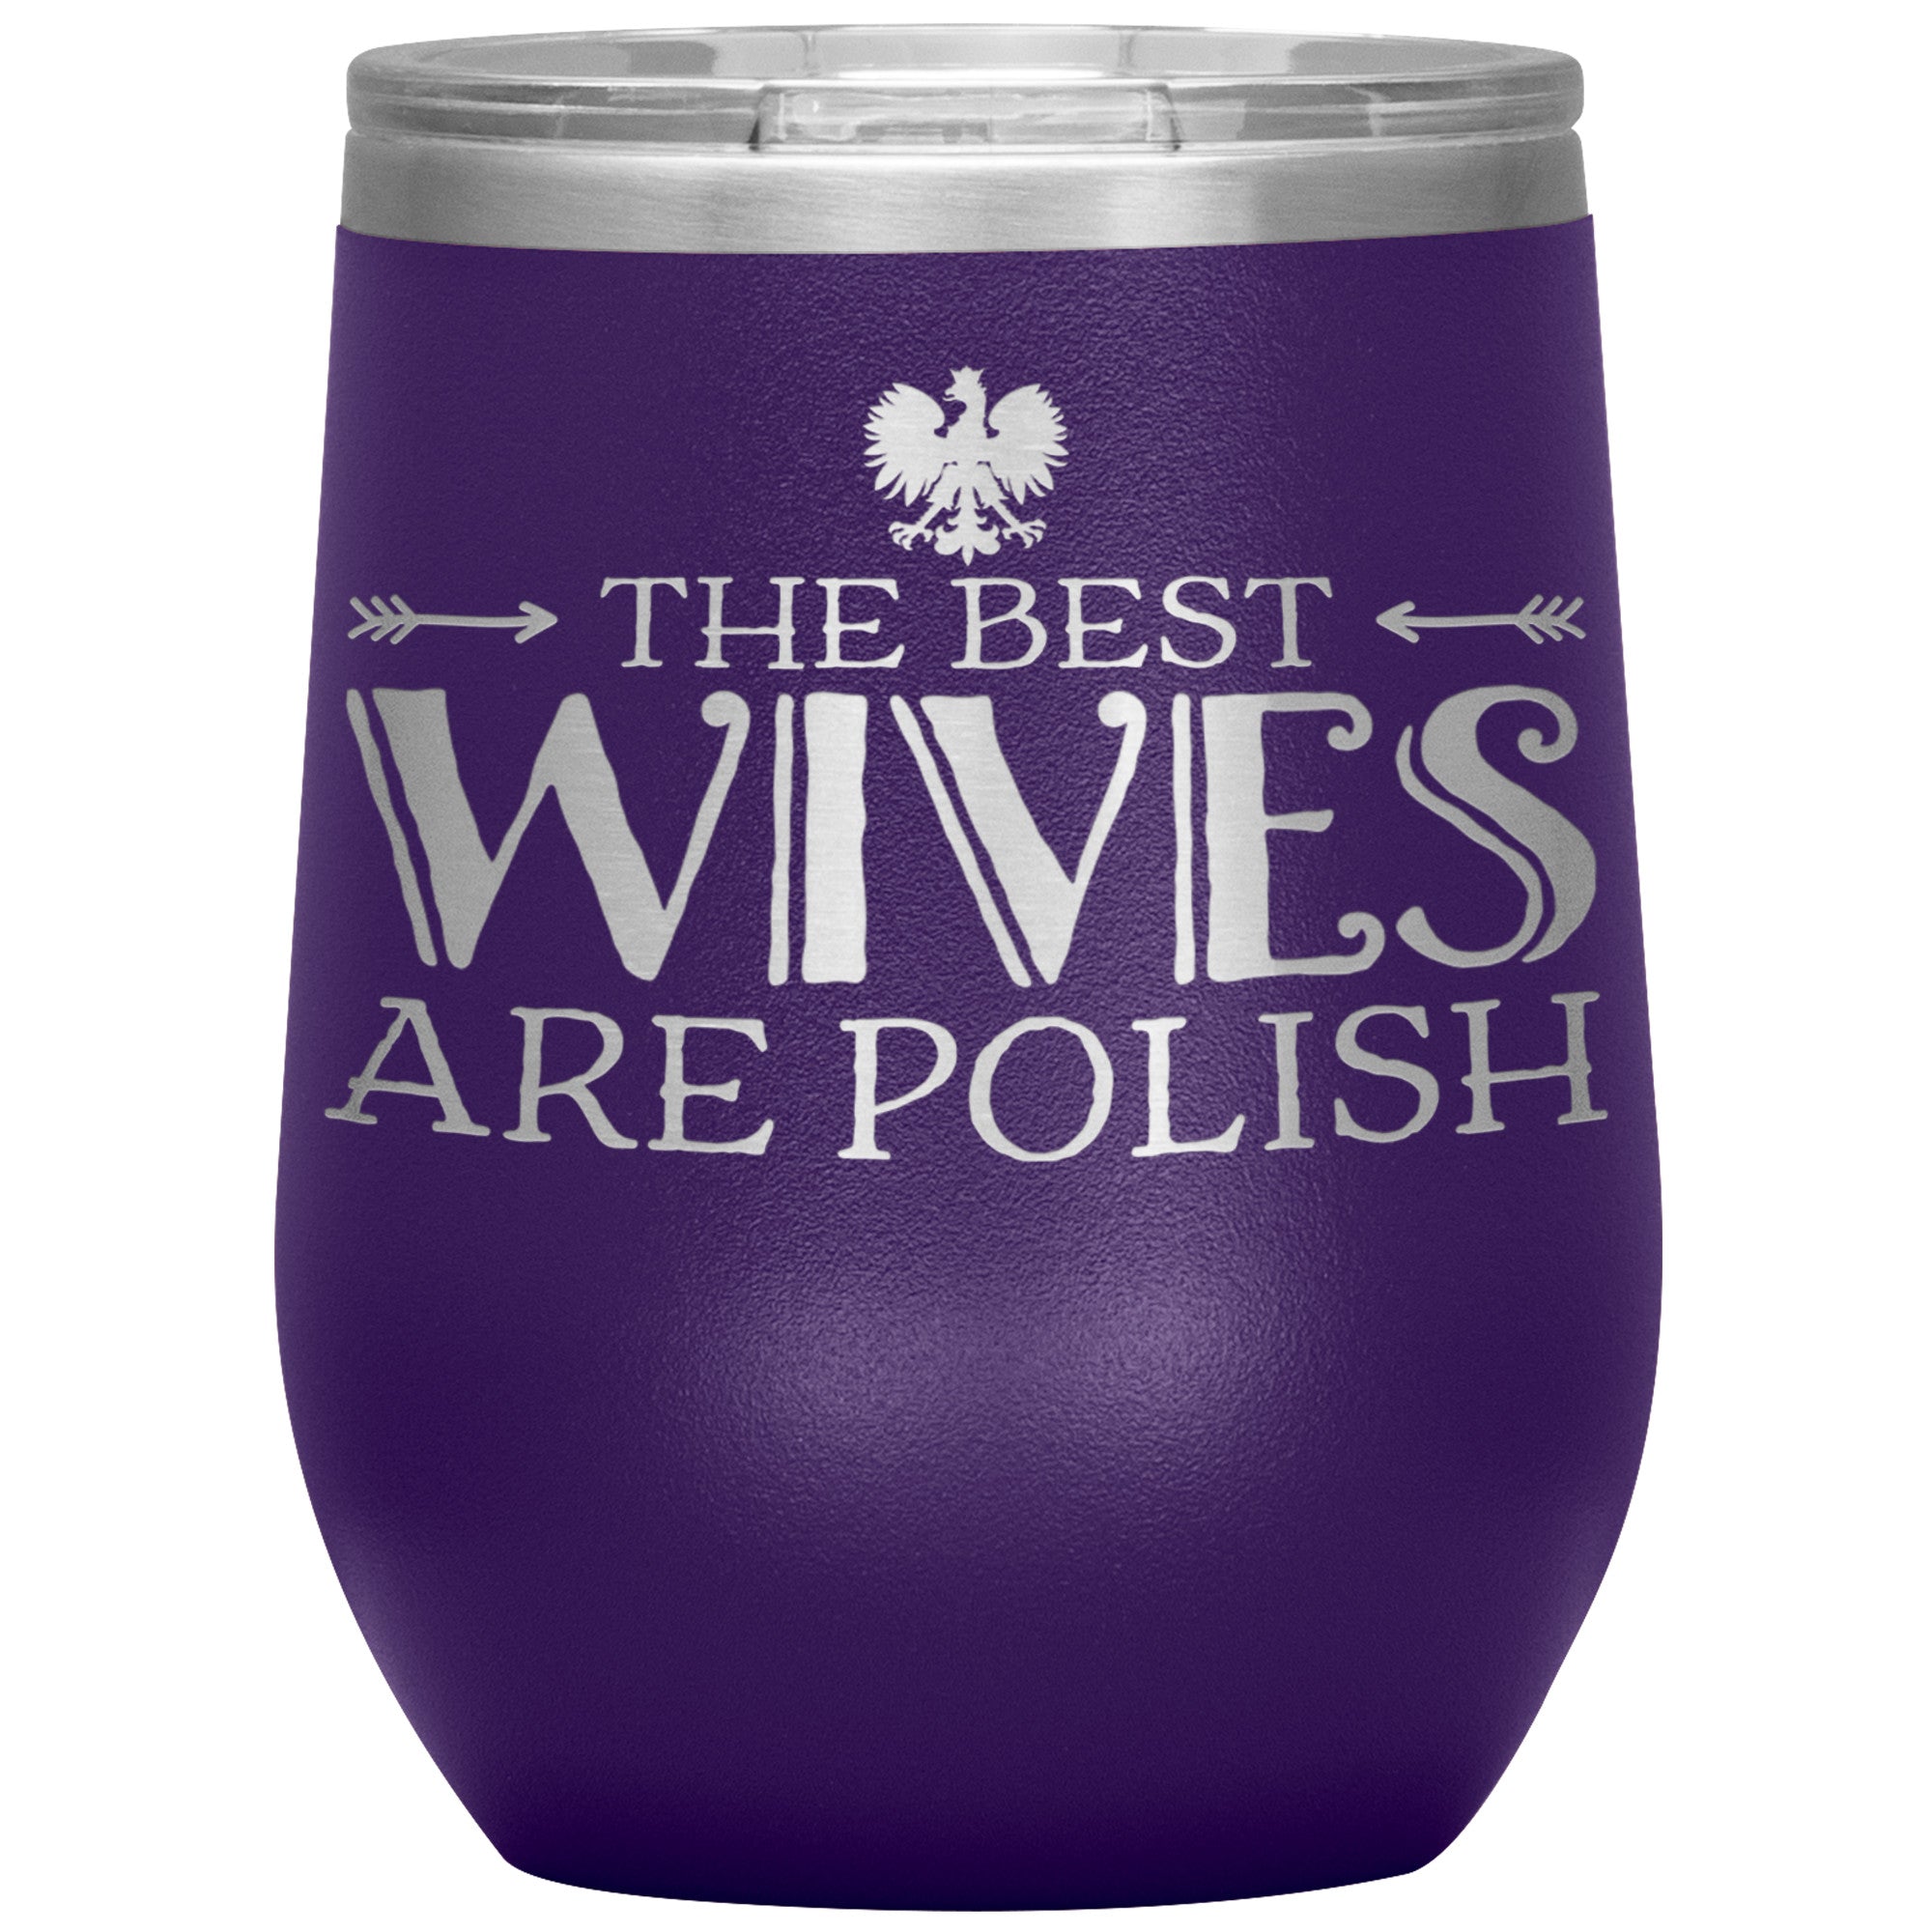 The Best Wives Are Polish Insulated Wine Tumbler Tumblers teelaunch Purple  